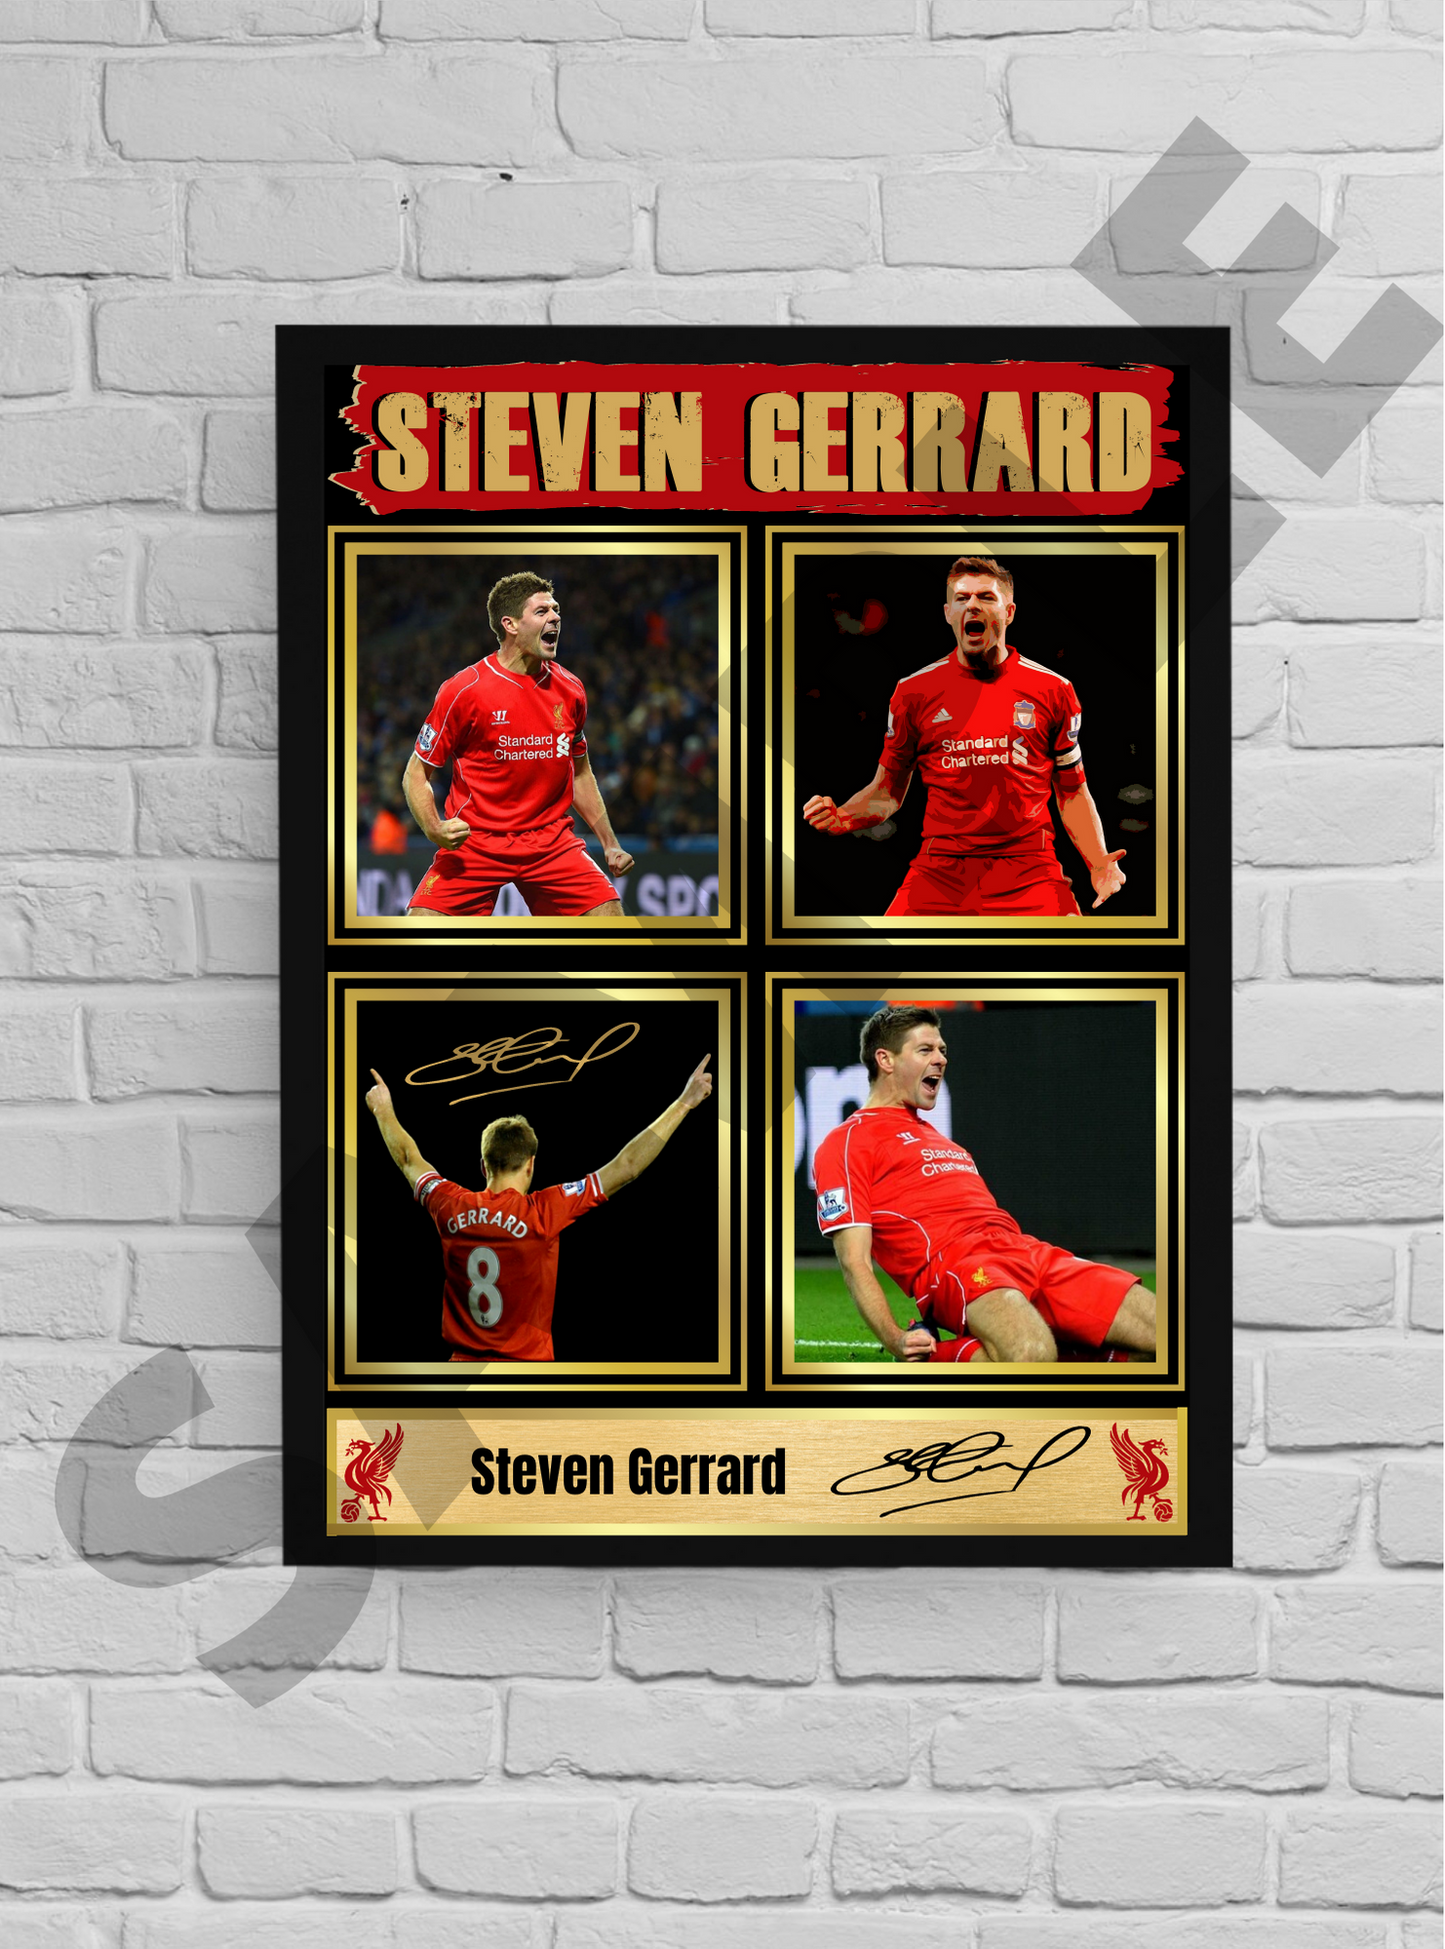 Stevie G (Liverpool) #31 - Football Collectible/Memorabilia/Print signed